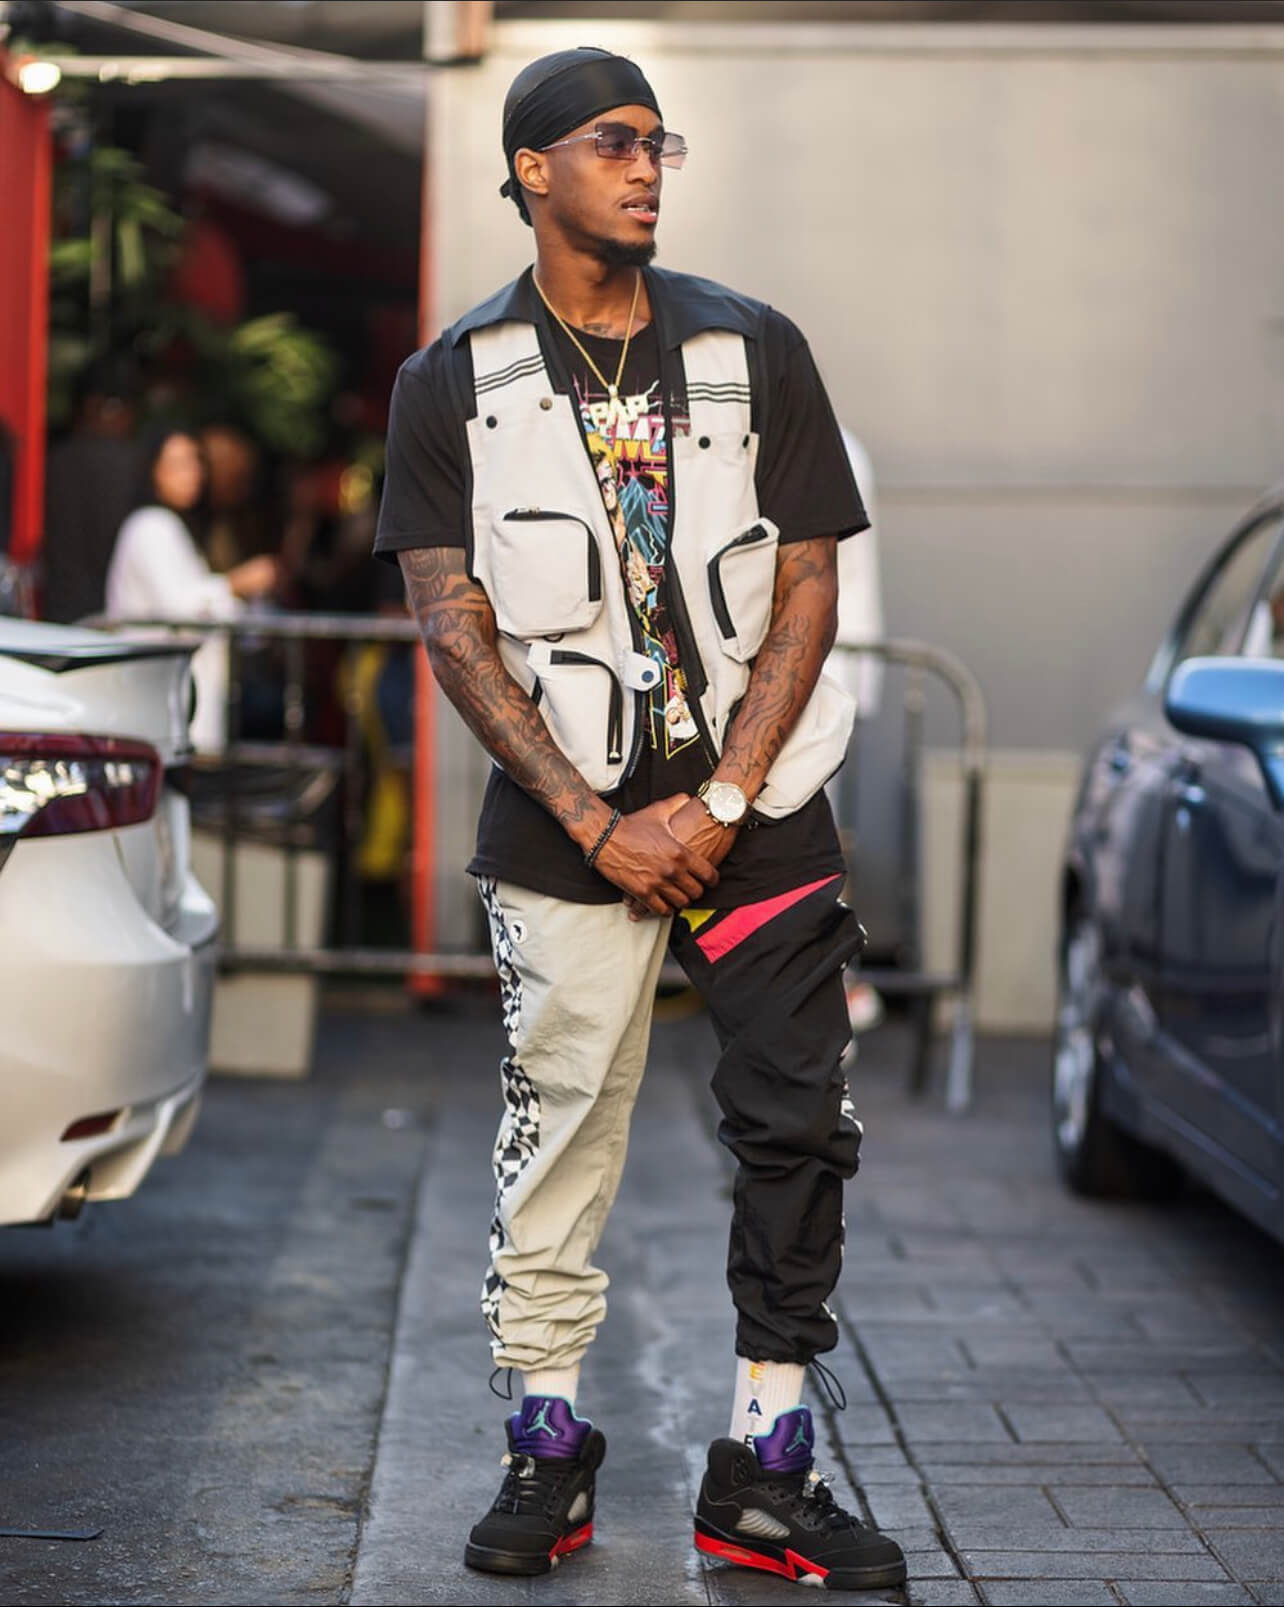 A man posing with a black durag, graphic tee and vest, adoring a pair of CJ frames. He's also wearing a popular timepiece of the brand called Varsity.